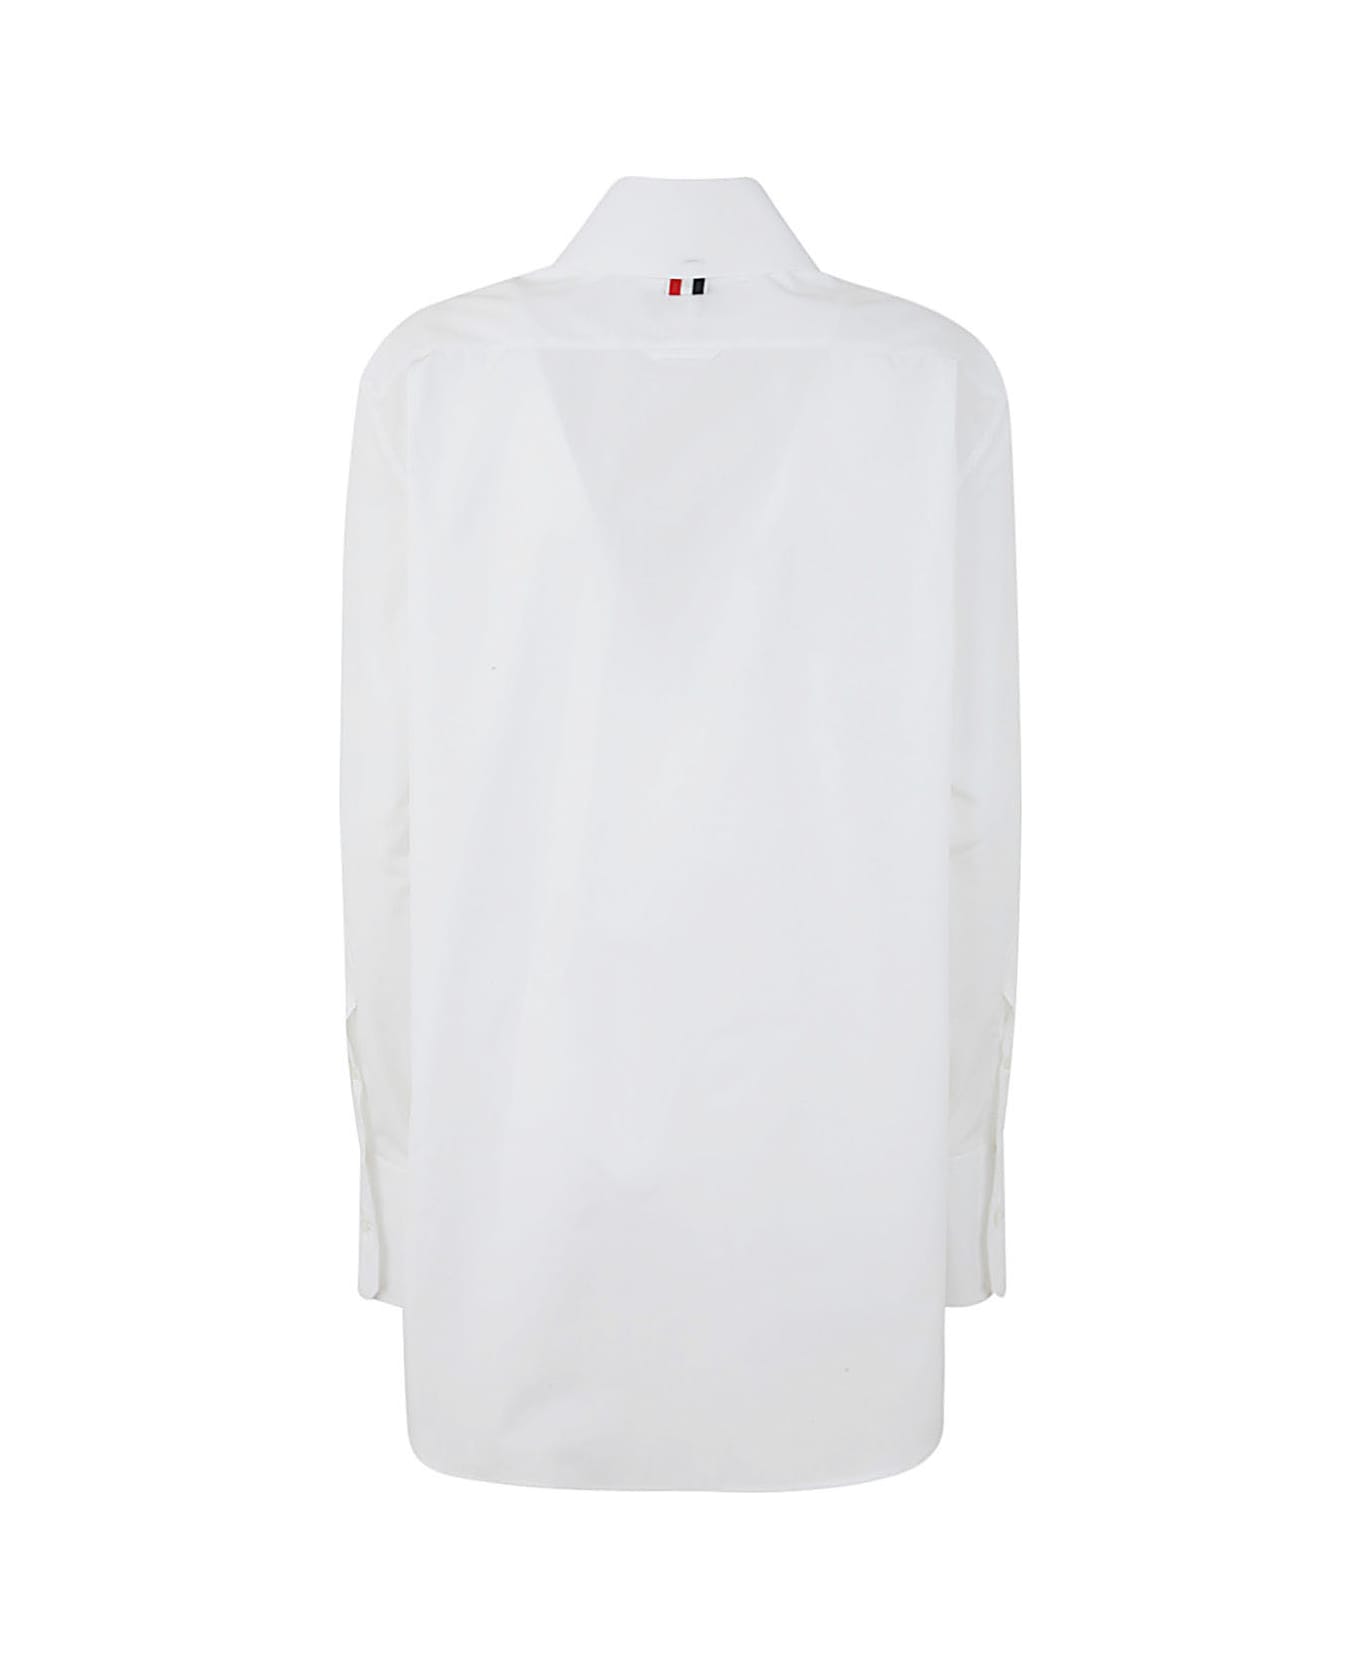 Thom Browne Exaggerated Easy Fit Point Collar Shirt In Poplin - White